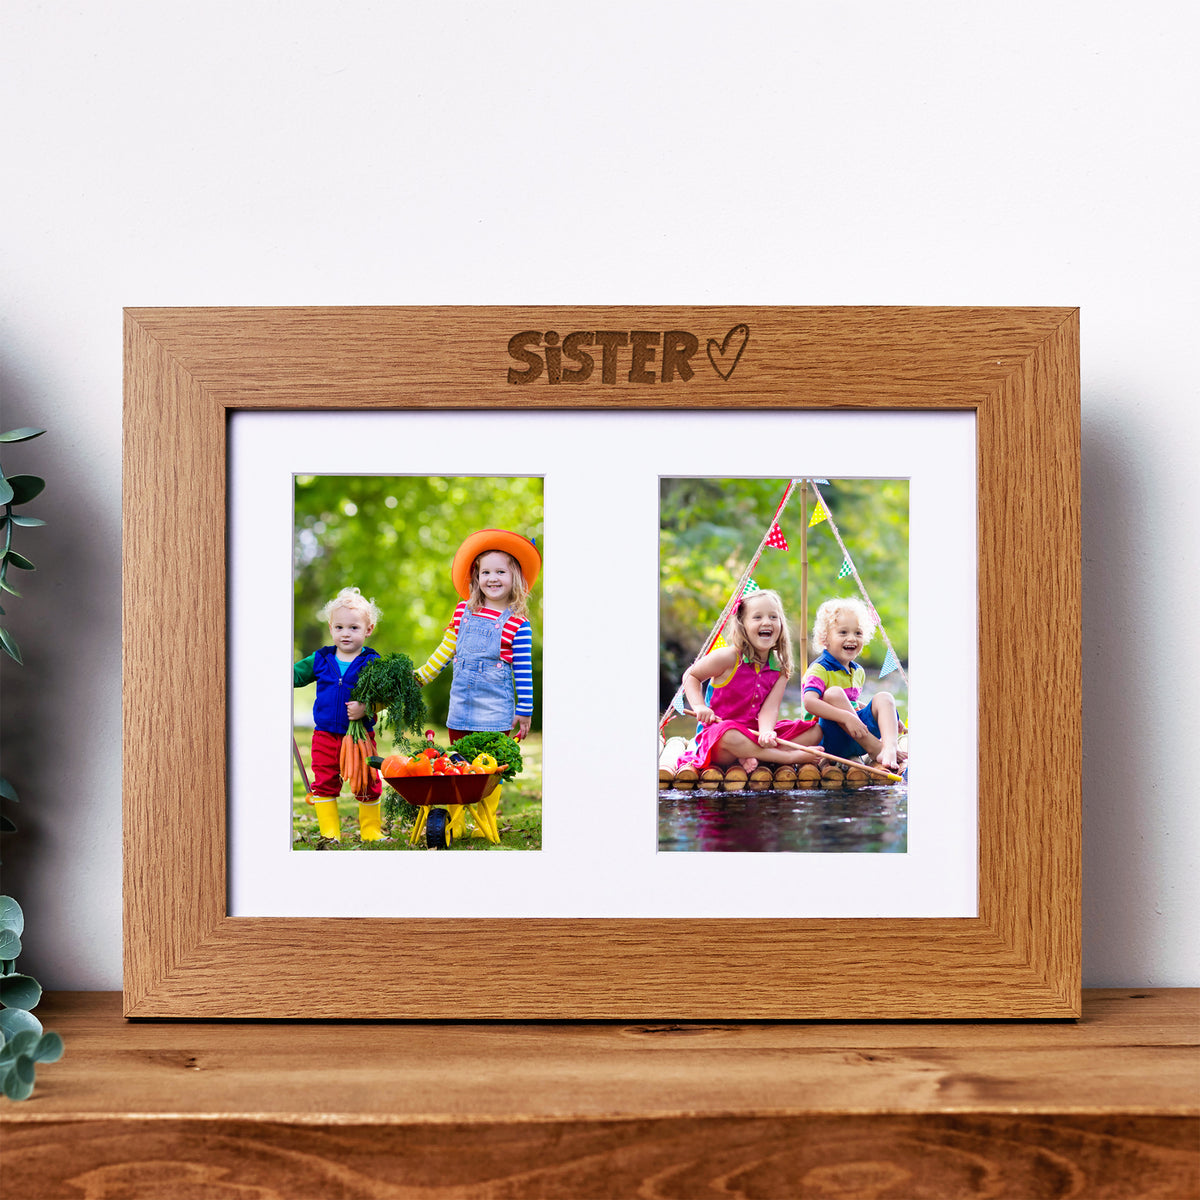 Sister Photo Picture Frame Double 6x4 Inch